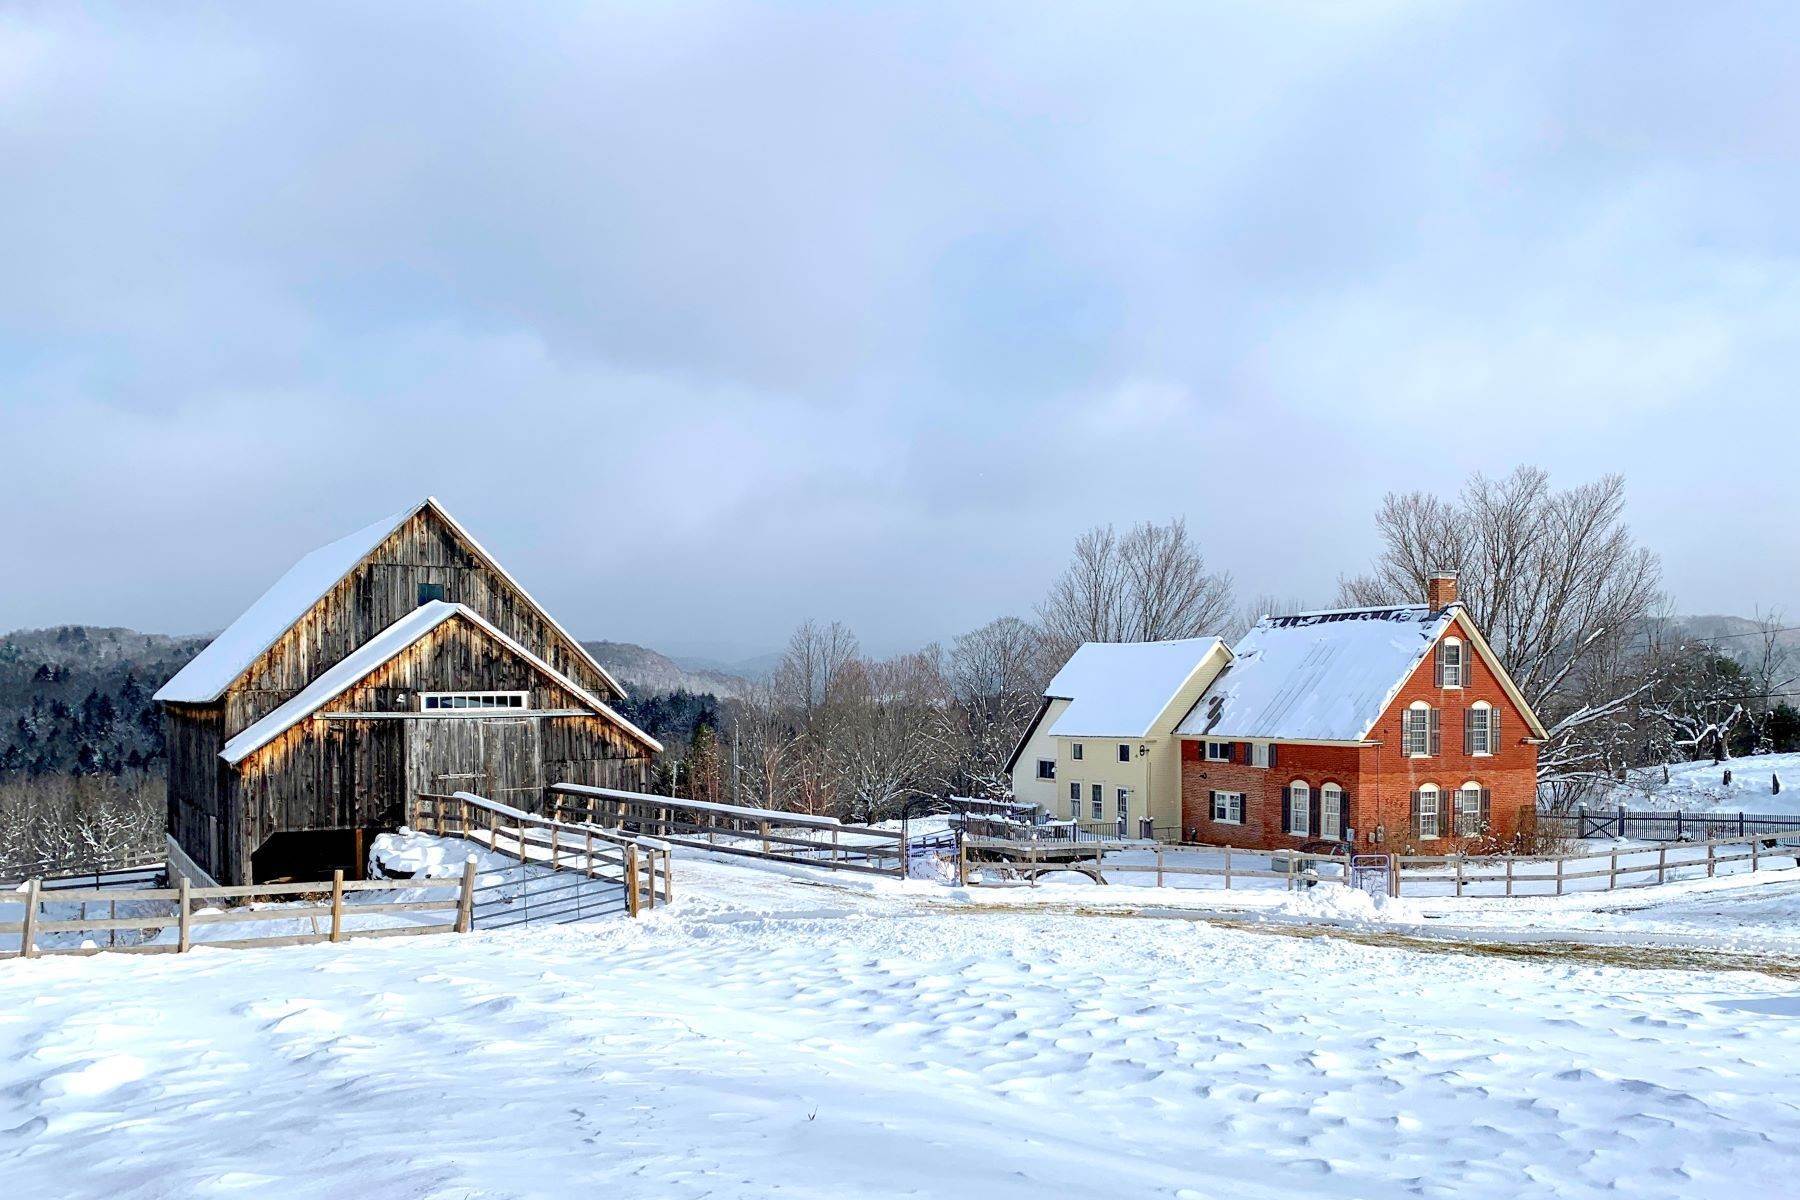 Property for Sale at Antique Farmhouse with Horse Facilities 271 Whitney Hill Road, Tunbridge, VT 05077